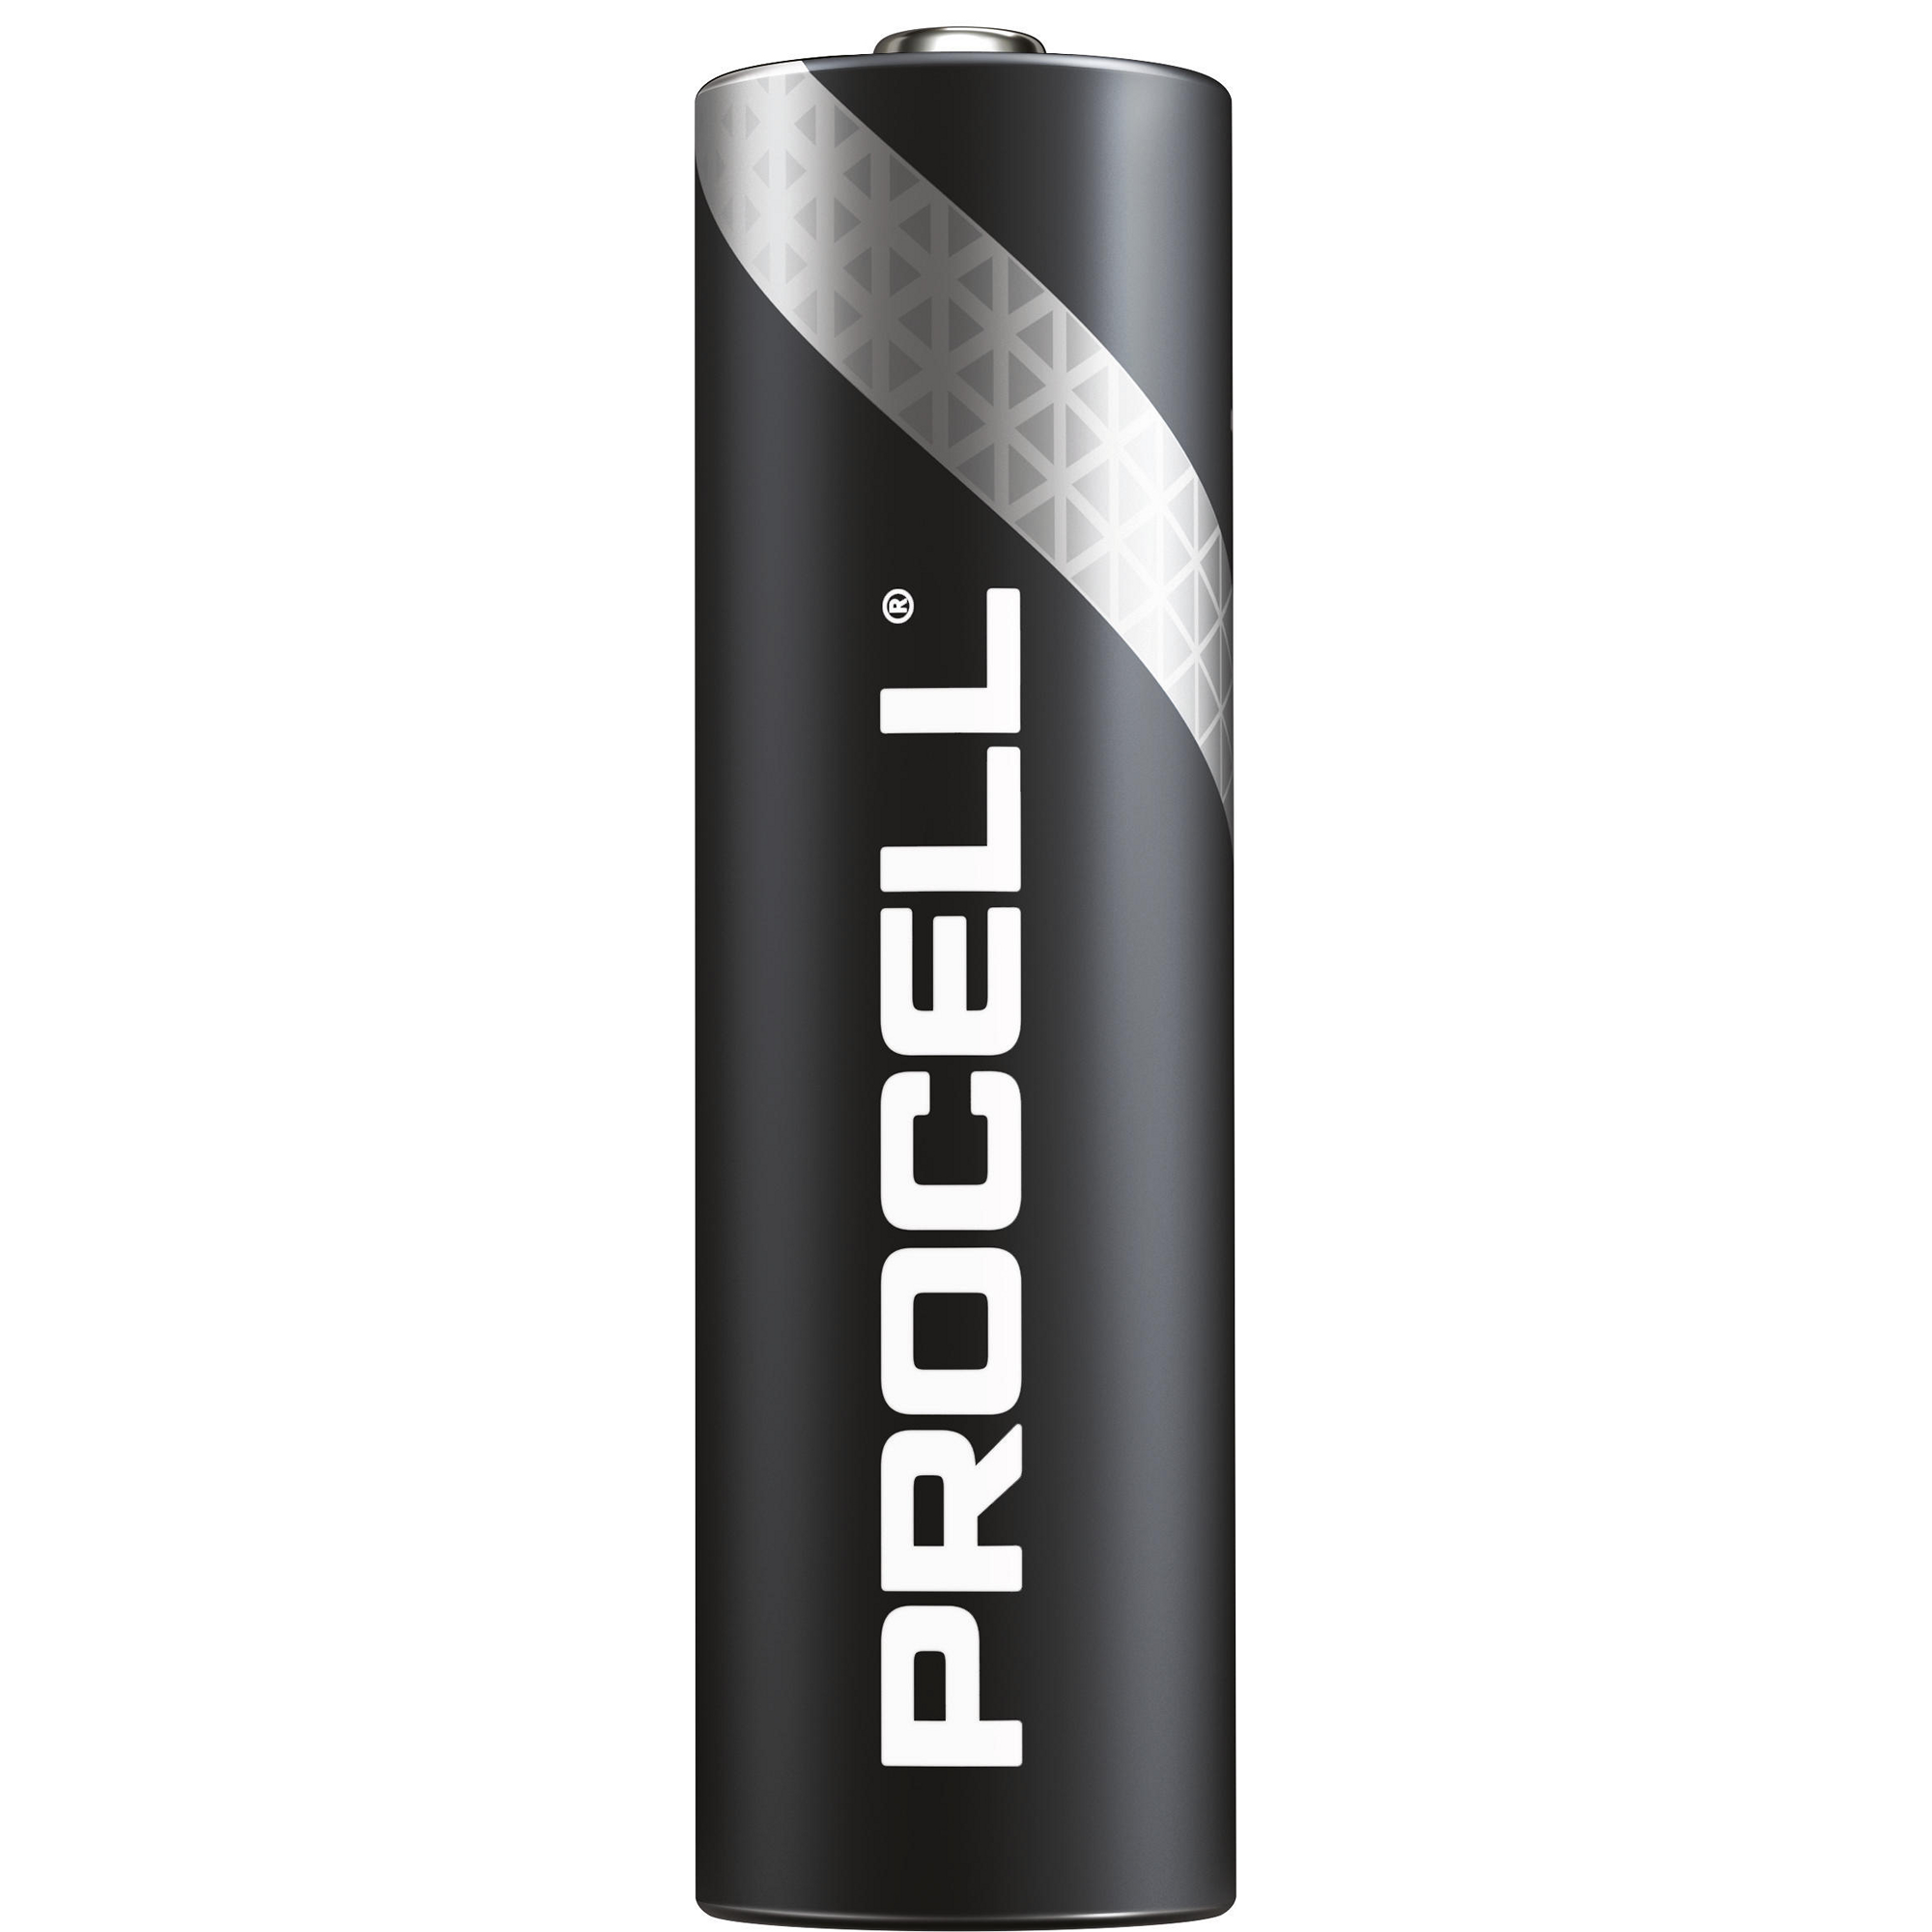 Duracell Procell Constant AA Batteries - Pack of 10